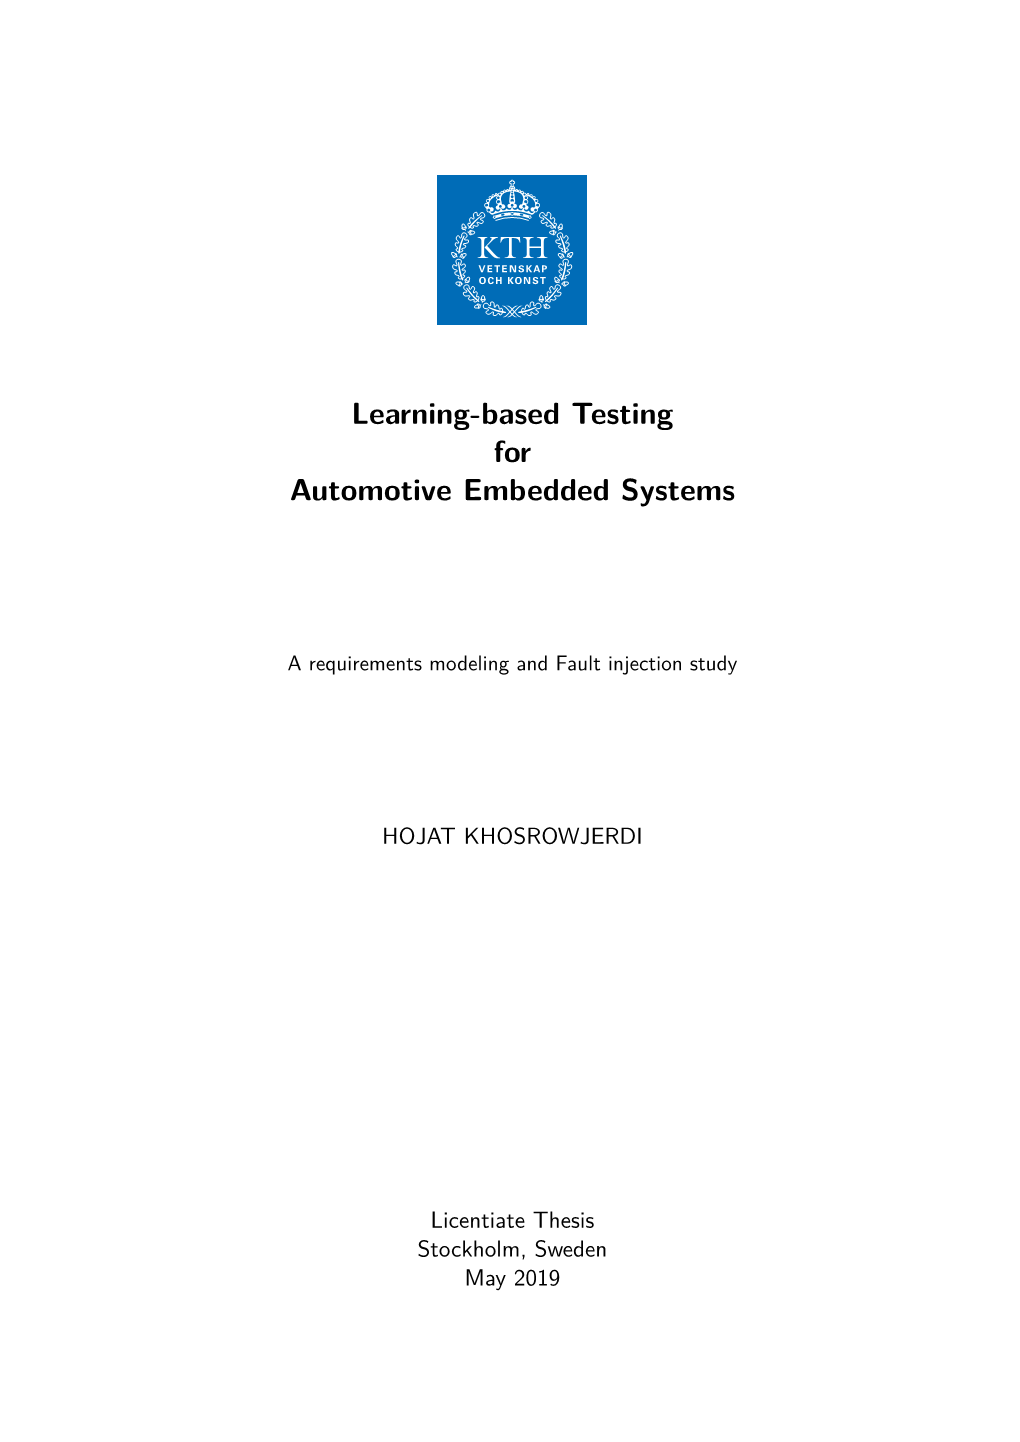 Learning-Based Testing for Automotive Embedded Systems